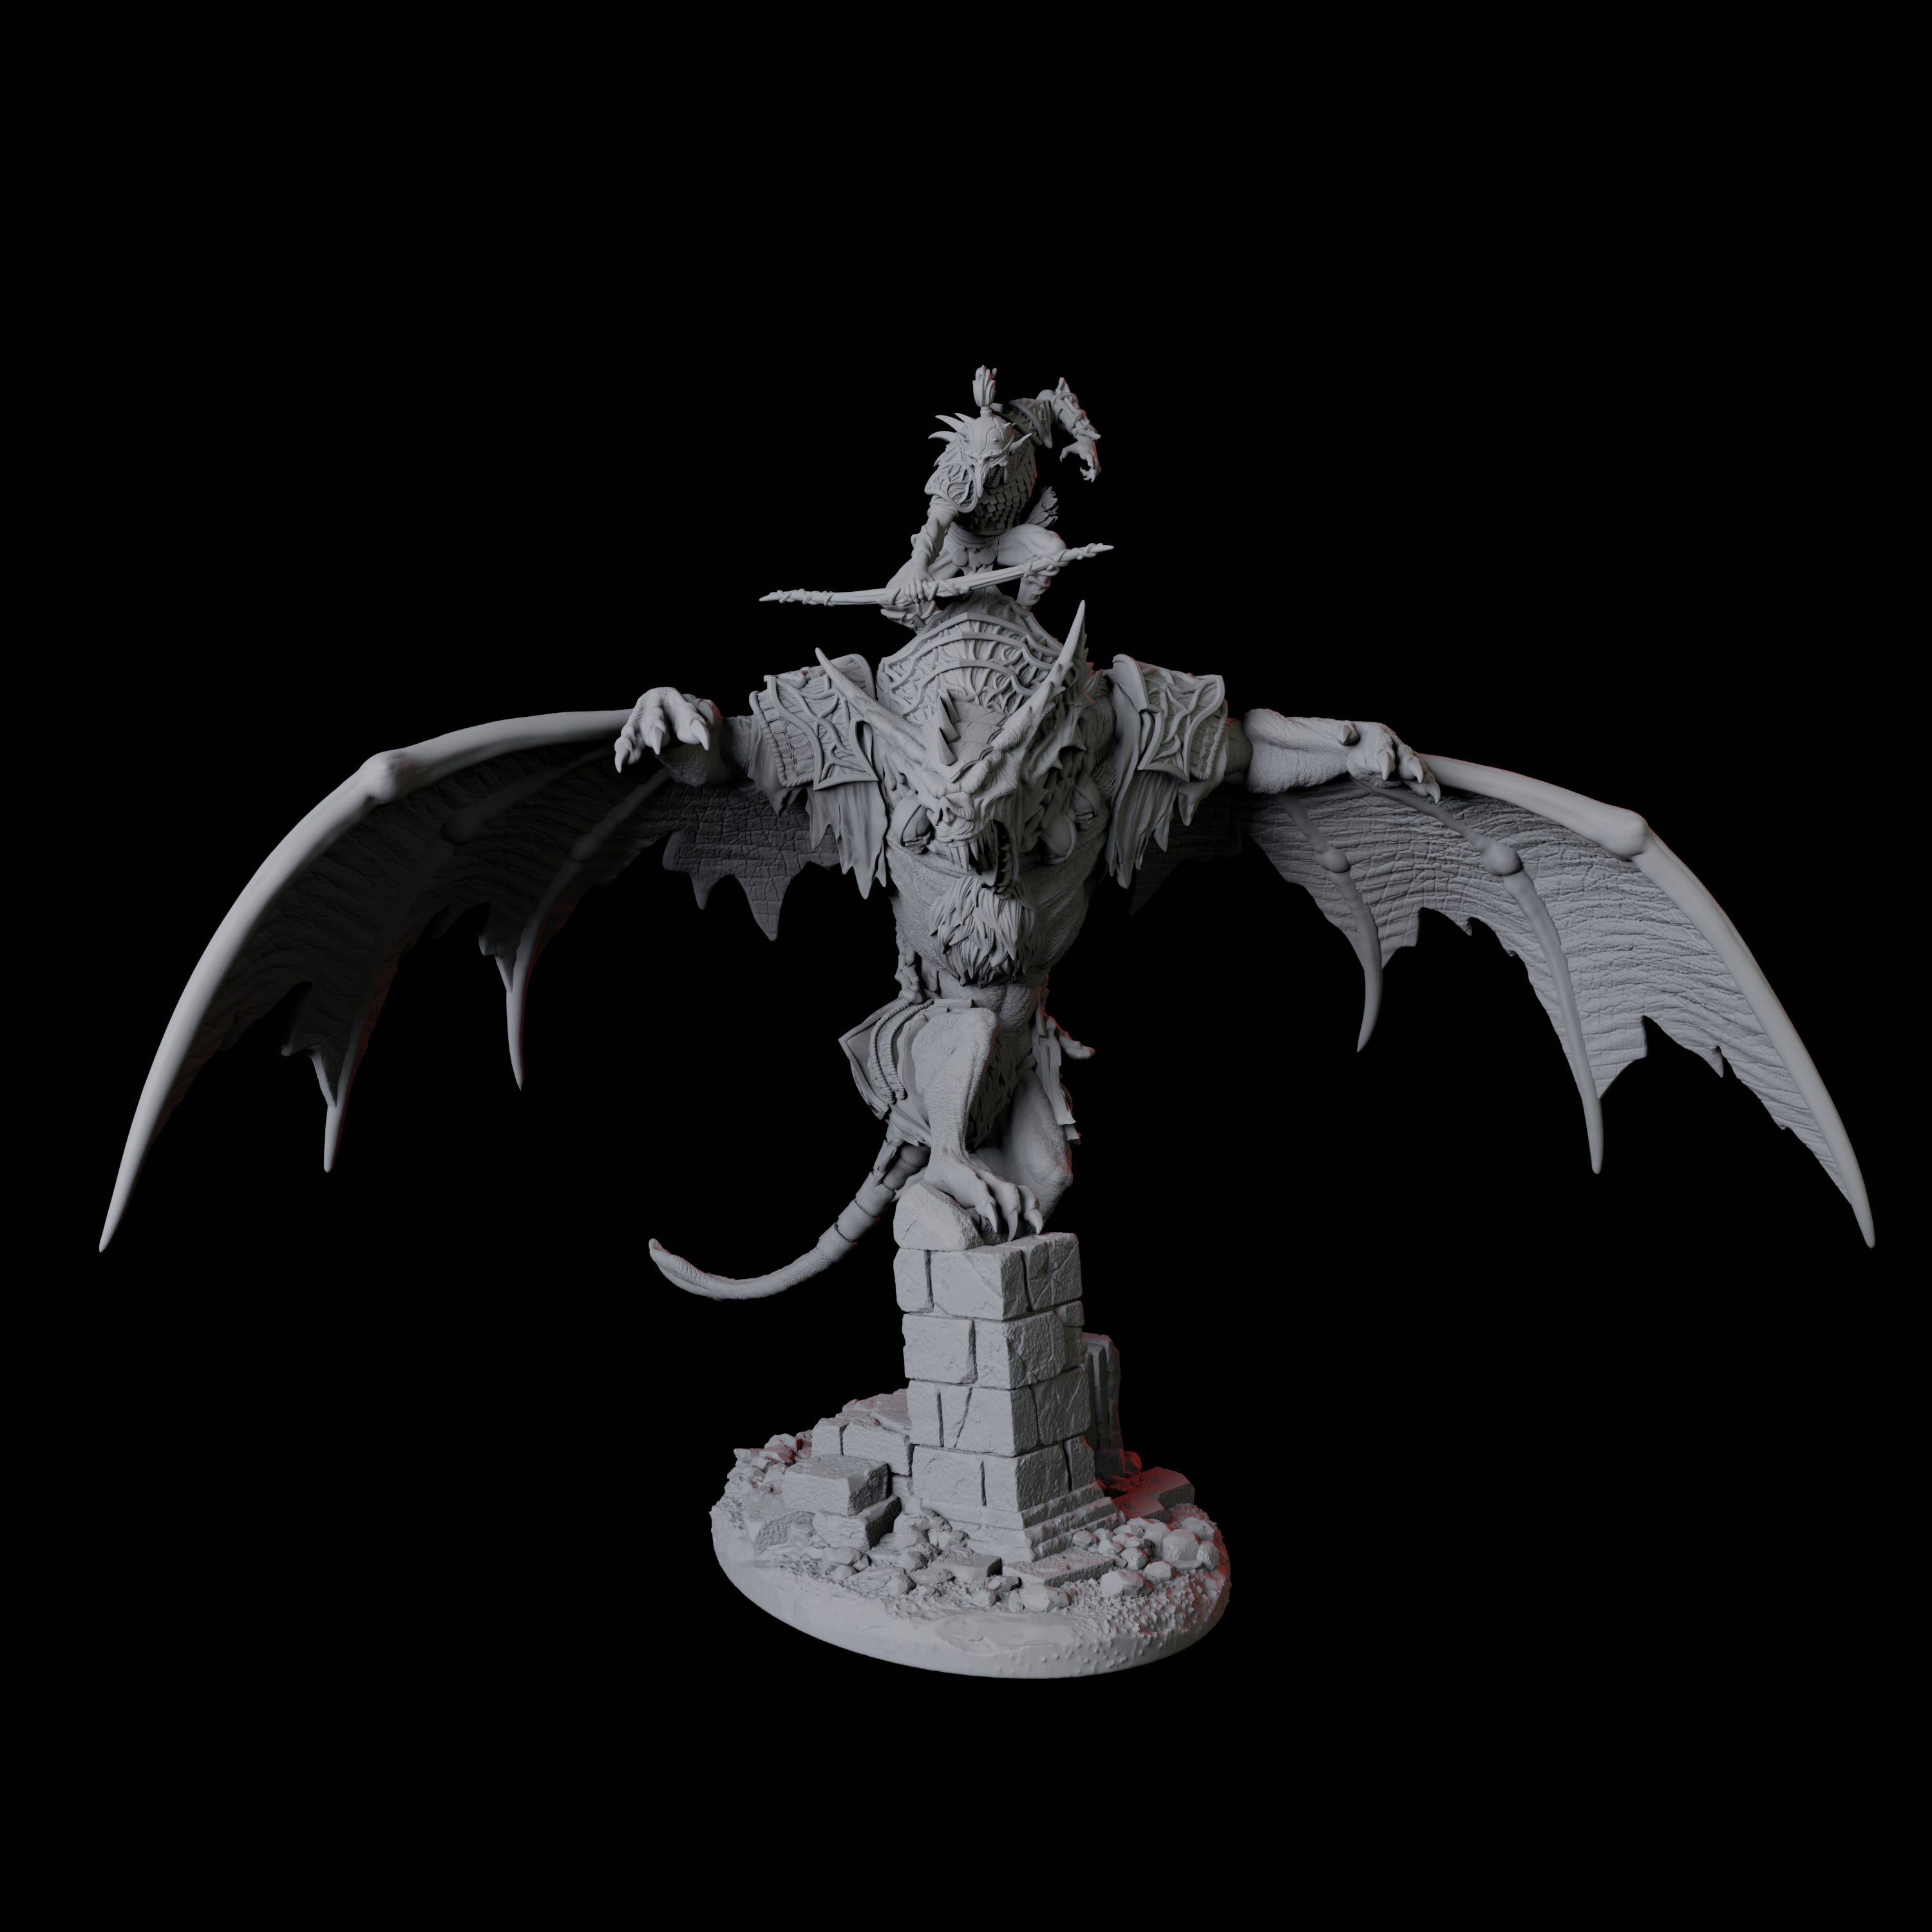 Swooping Vampire Spawn on Giant Bat A Miniature for Dungeons and Dragons, Pathfinder or other TTRPGs